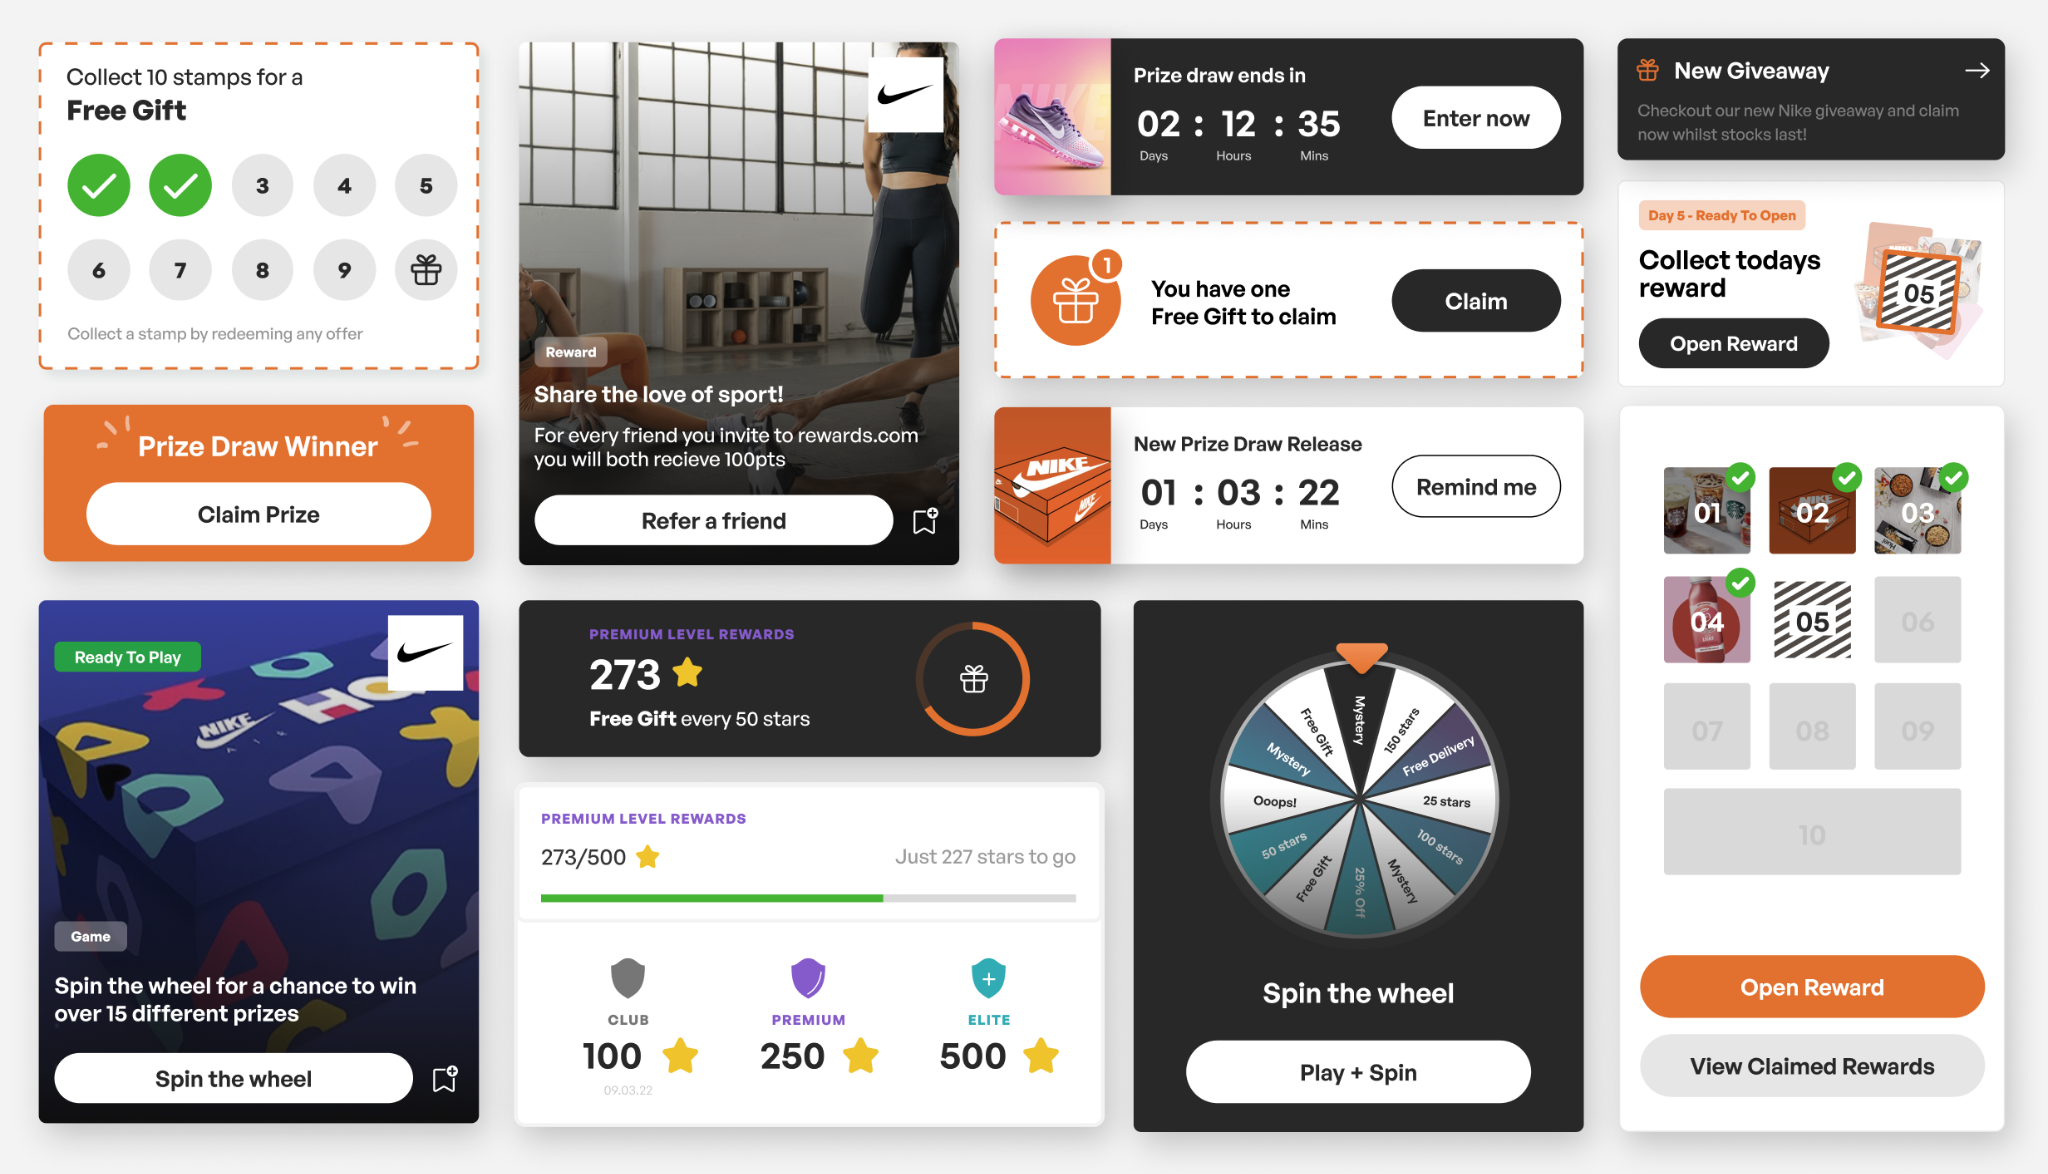 Gamification in loyalty programmes